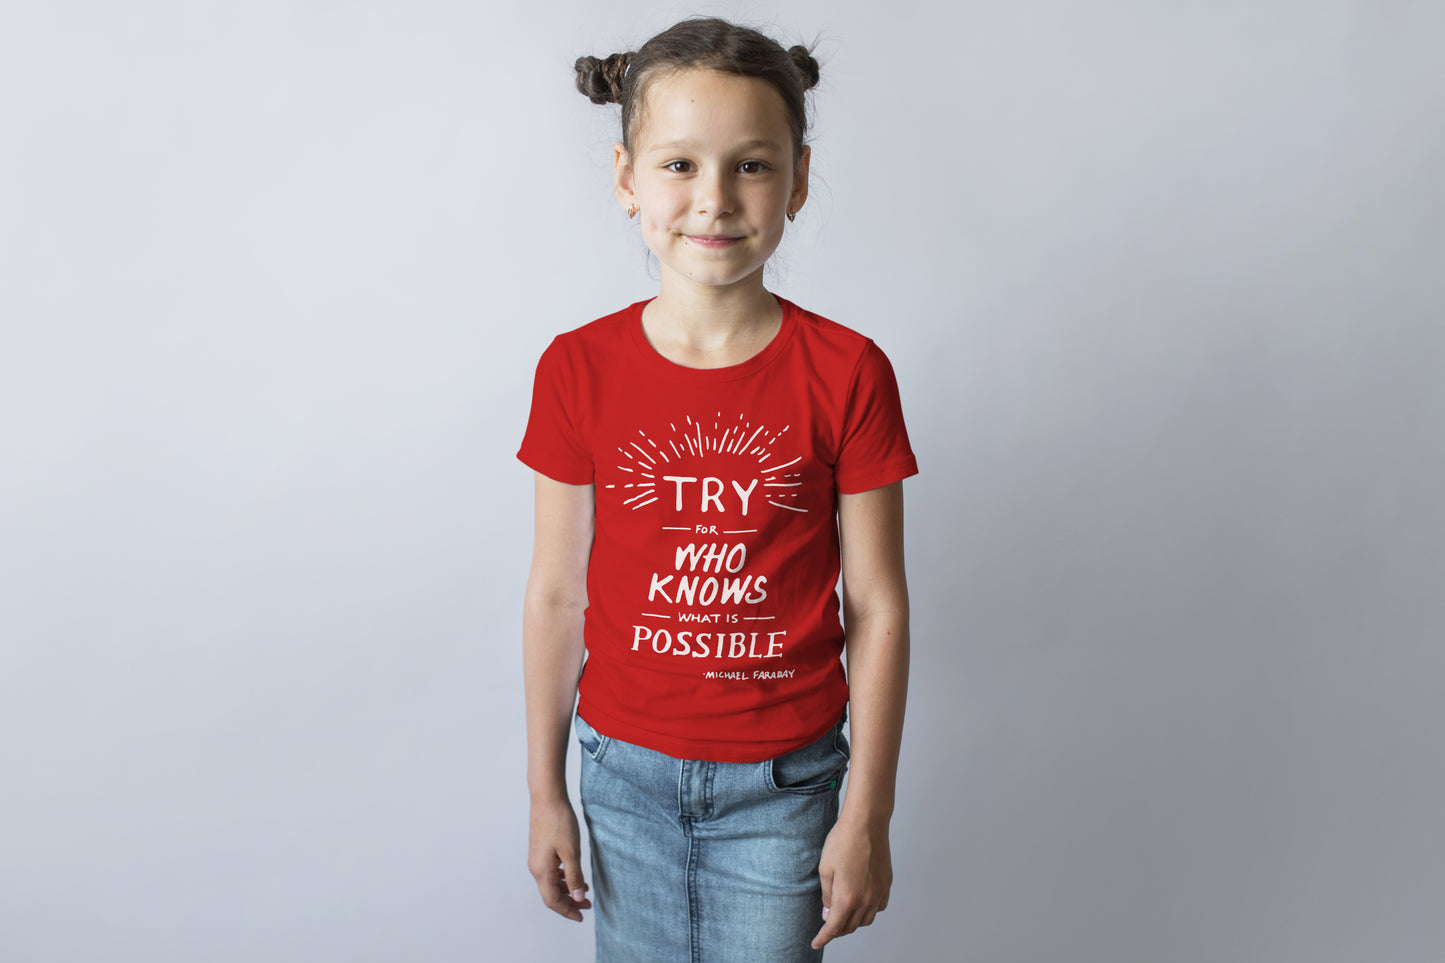 Michael Faraday Inspirational Quote T-shirt, Try For Who Knows What Is Possible